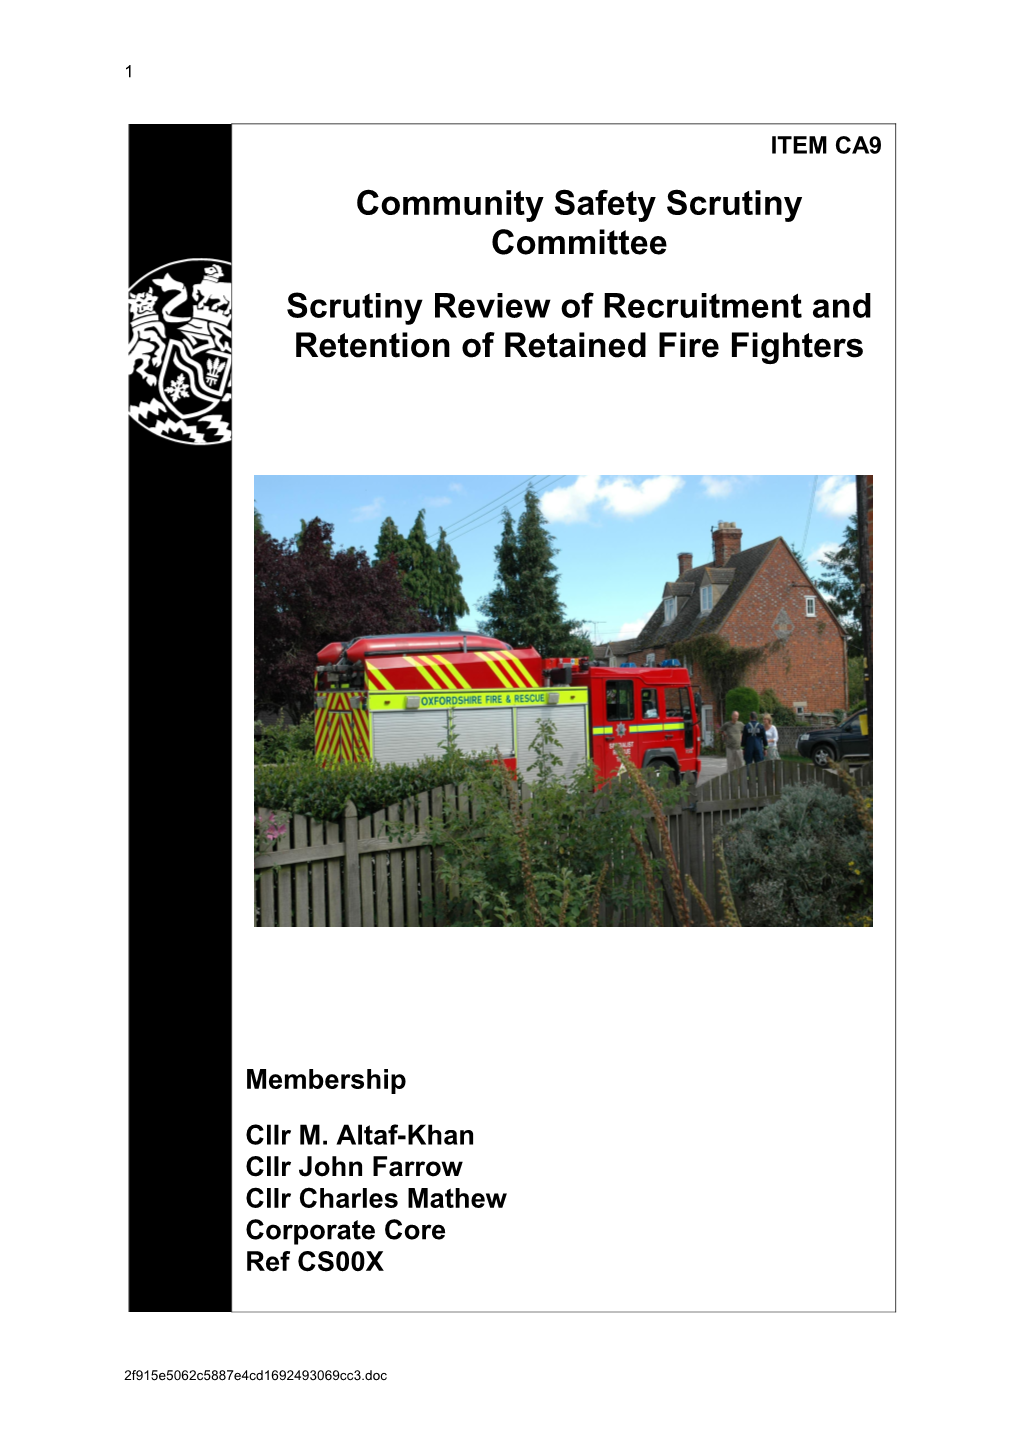 Community Safety Scrutiny Committee